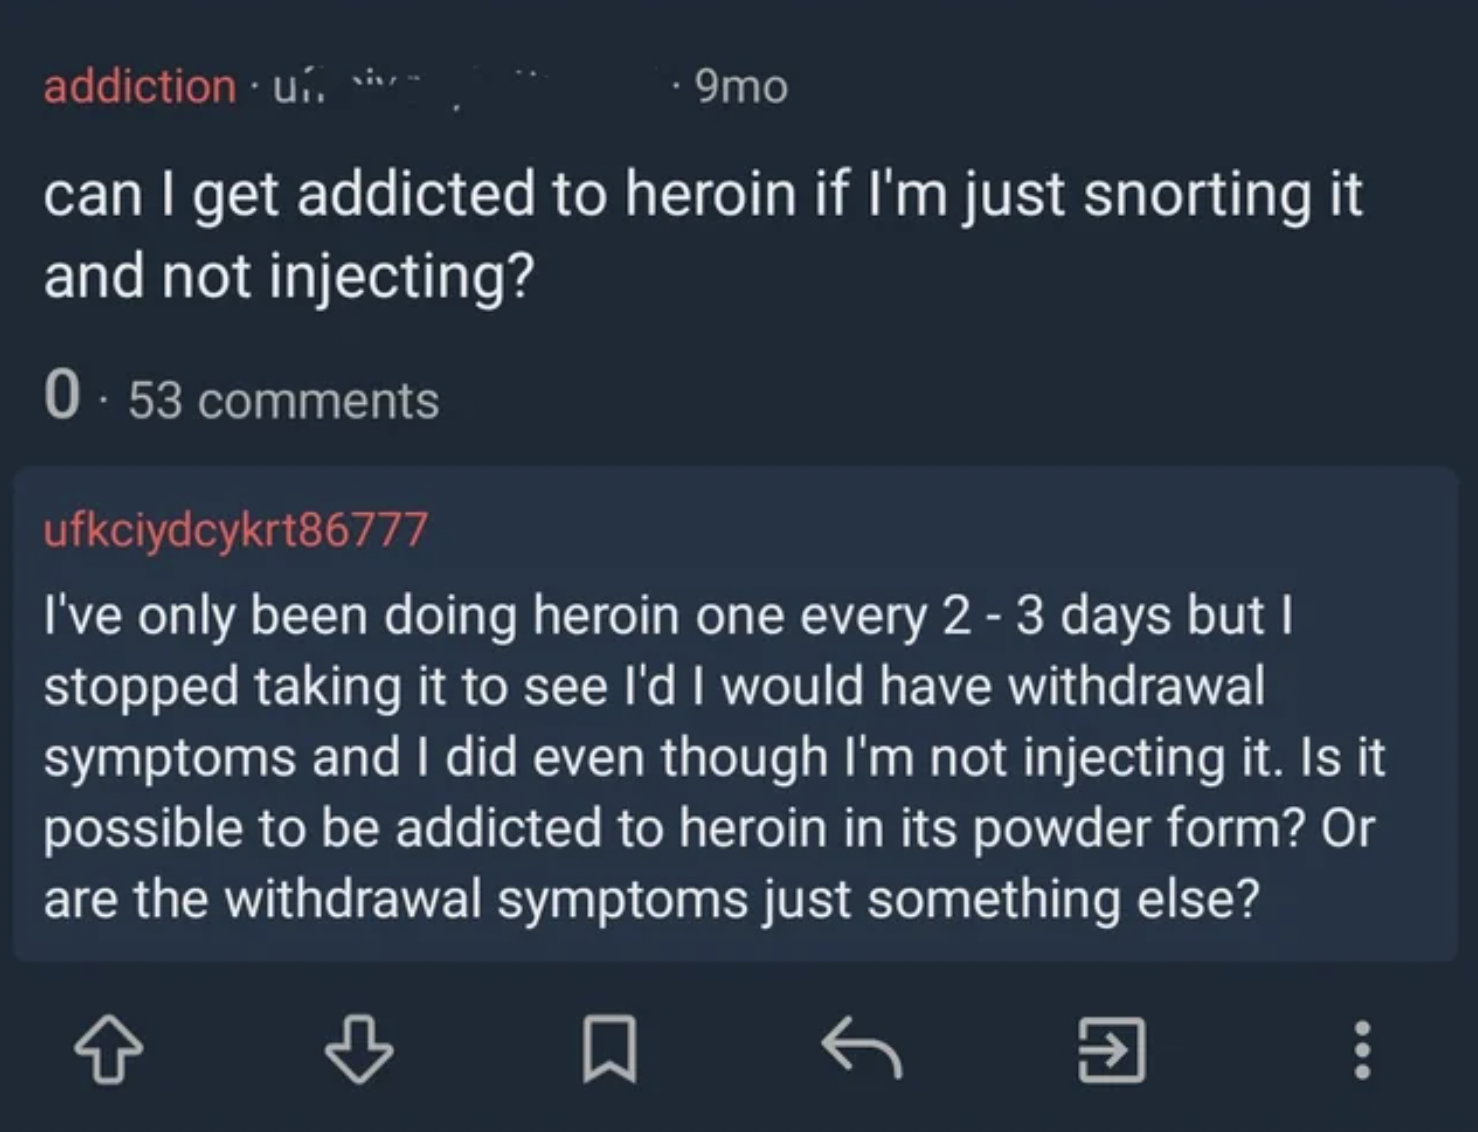 Trashy Fails - atmosphere - addiction u. . 9mo can I get addicted to heroin if I'm just snorting it and not injecting? 0.53 ufkciydcykrt86777 I've only been doing heroin one every 2 3 days but I stopped taking it to see I'd I would have withdrawal symptom